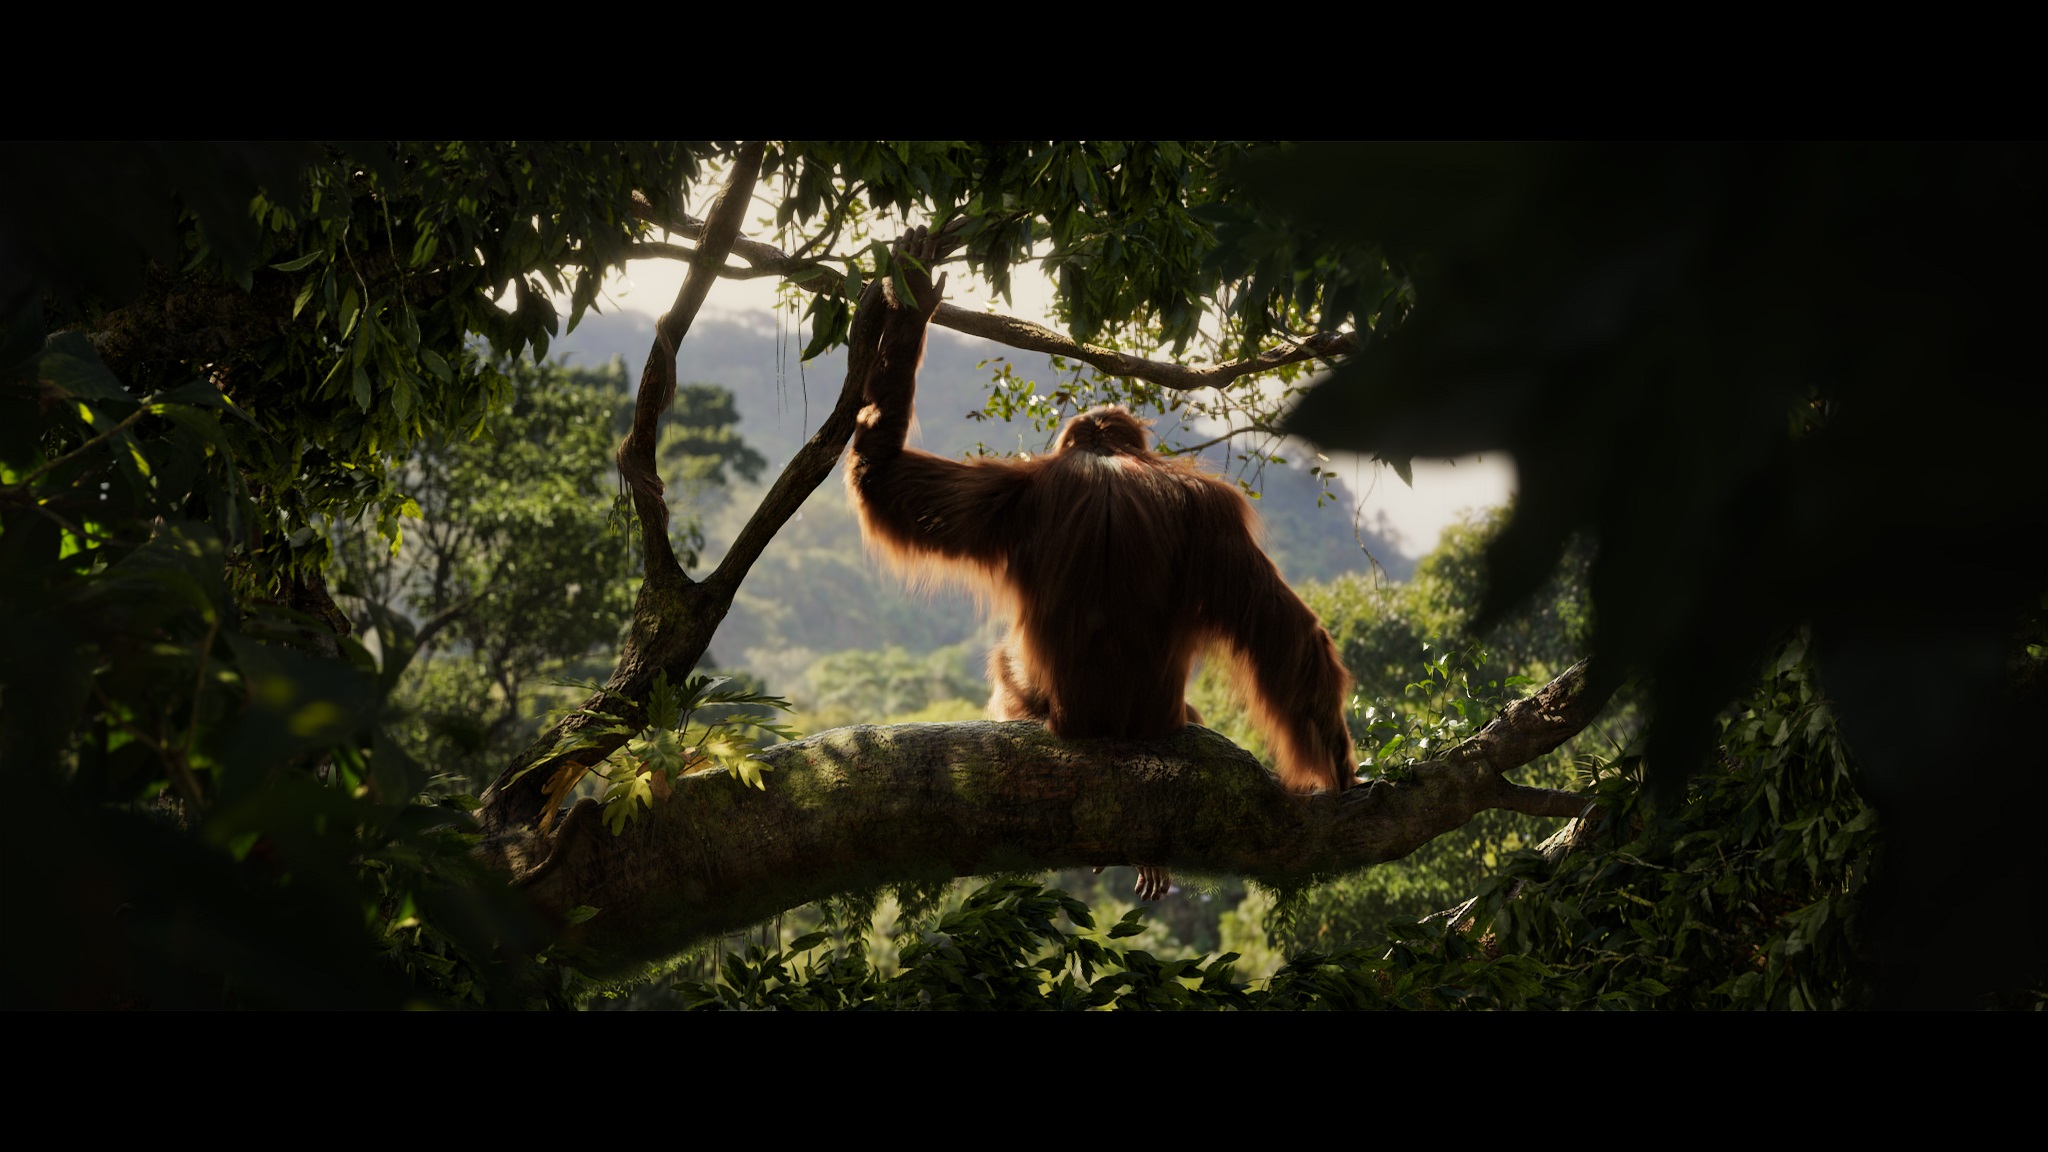 A shot from the VES Student Award winning film showing Green the orangutan looking out at the jungle.